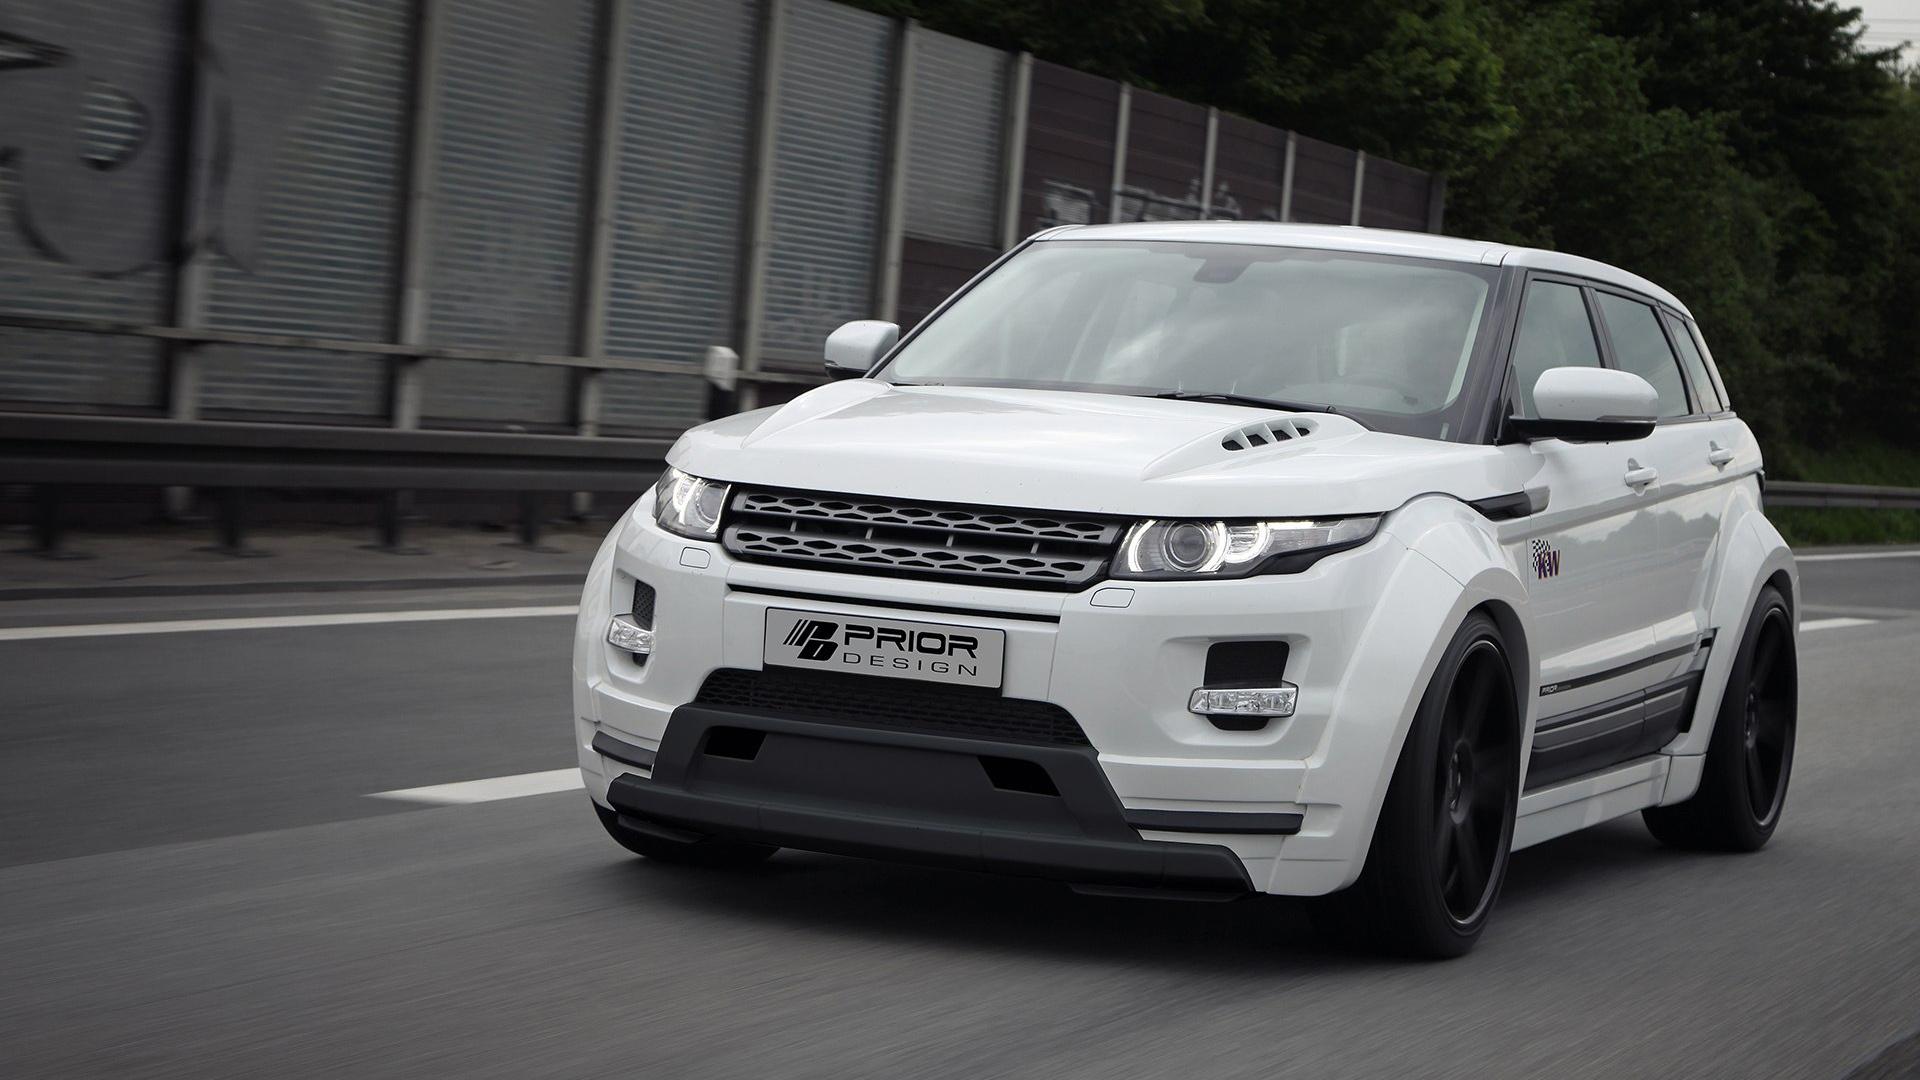 Land Rover Evoque Wallpapers - Wallpaper Cave